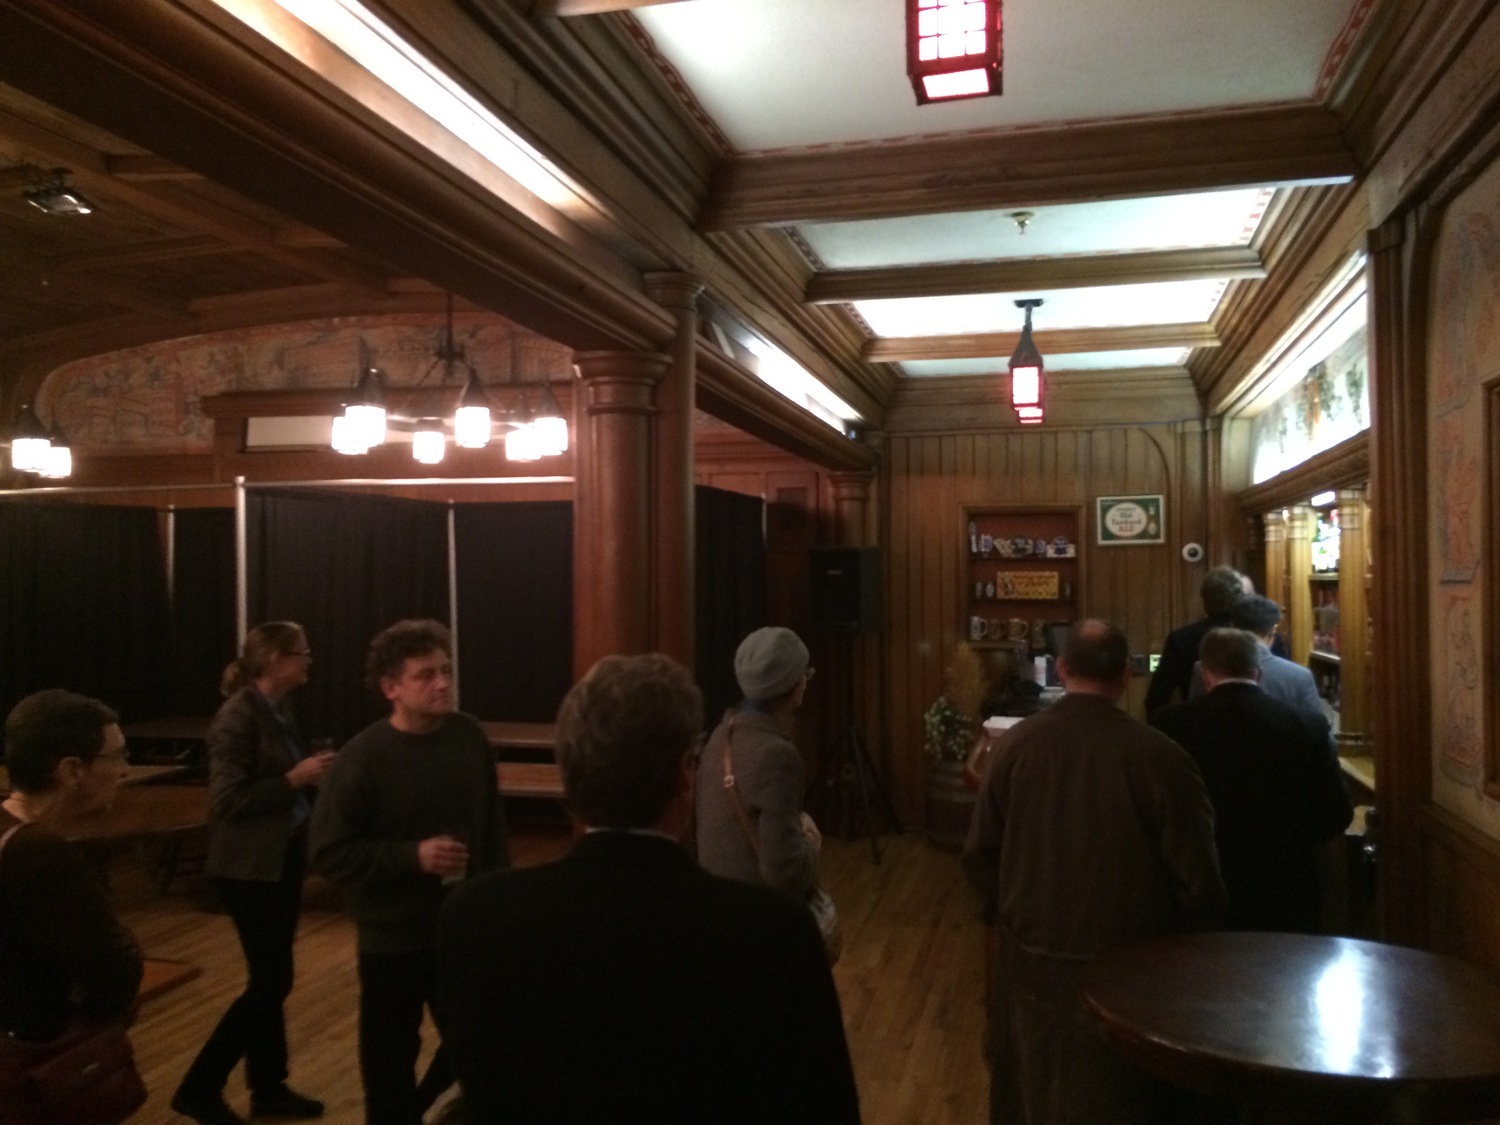 WTHP+at+Best+Place,+Historic+Pabst+Brewery,+MKW+-+2015,+Nov17+P.jpeg